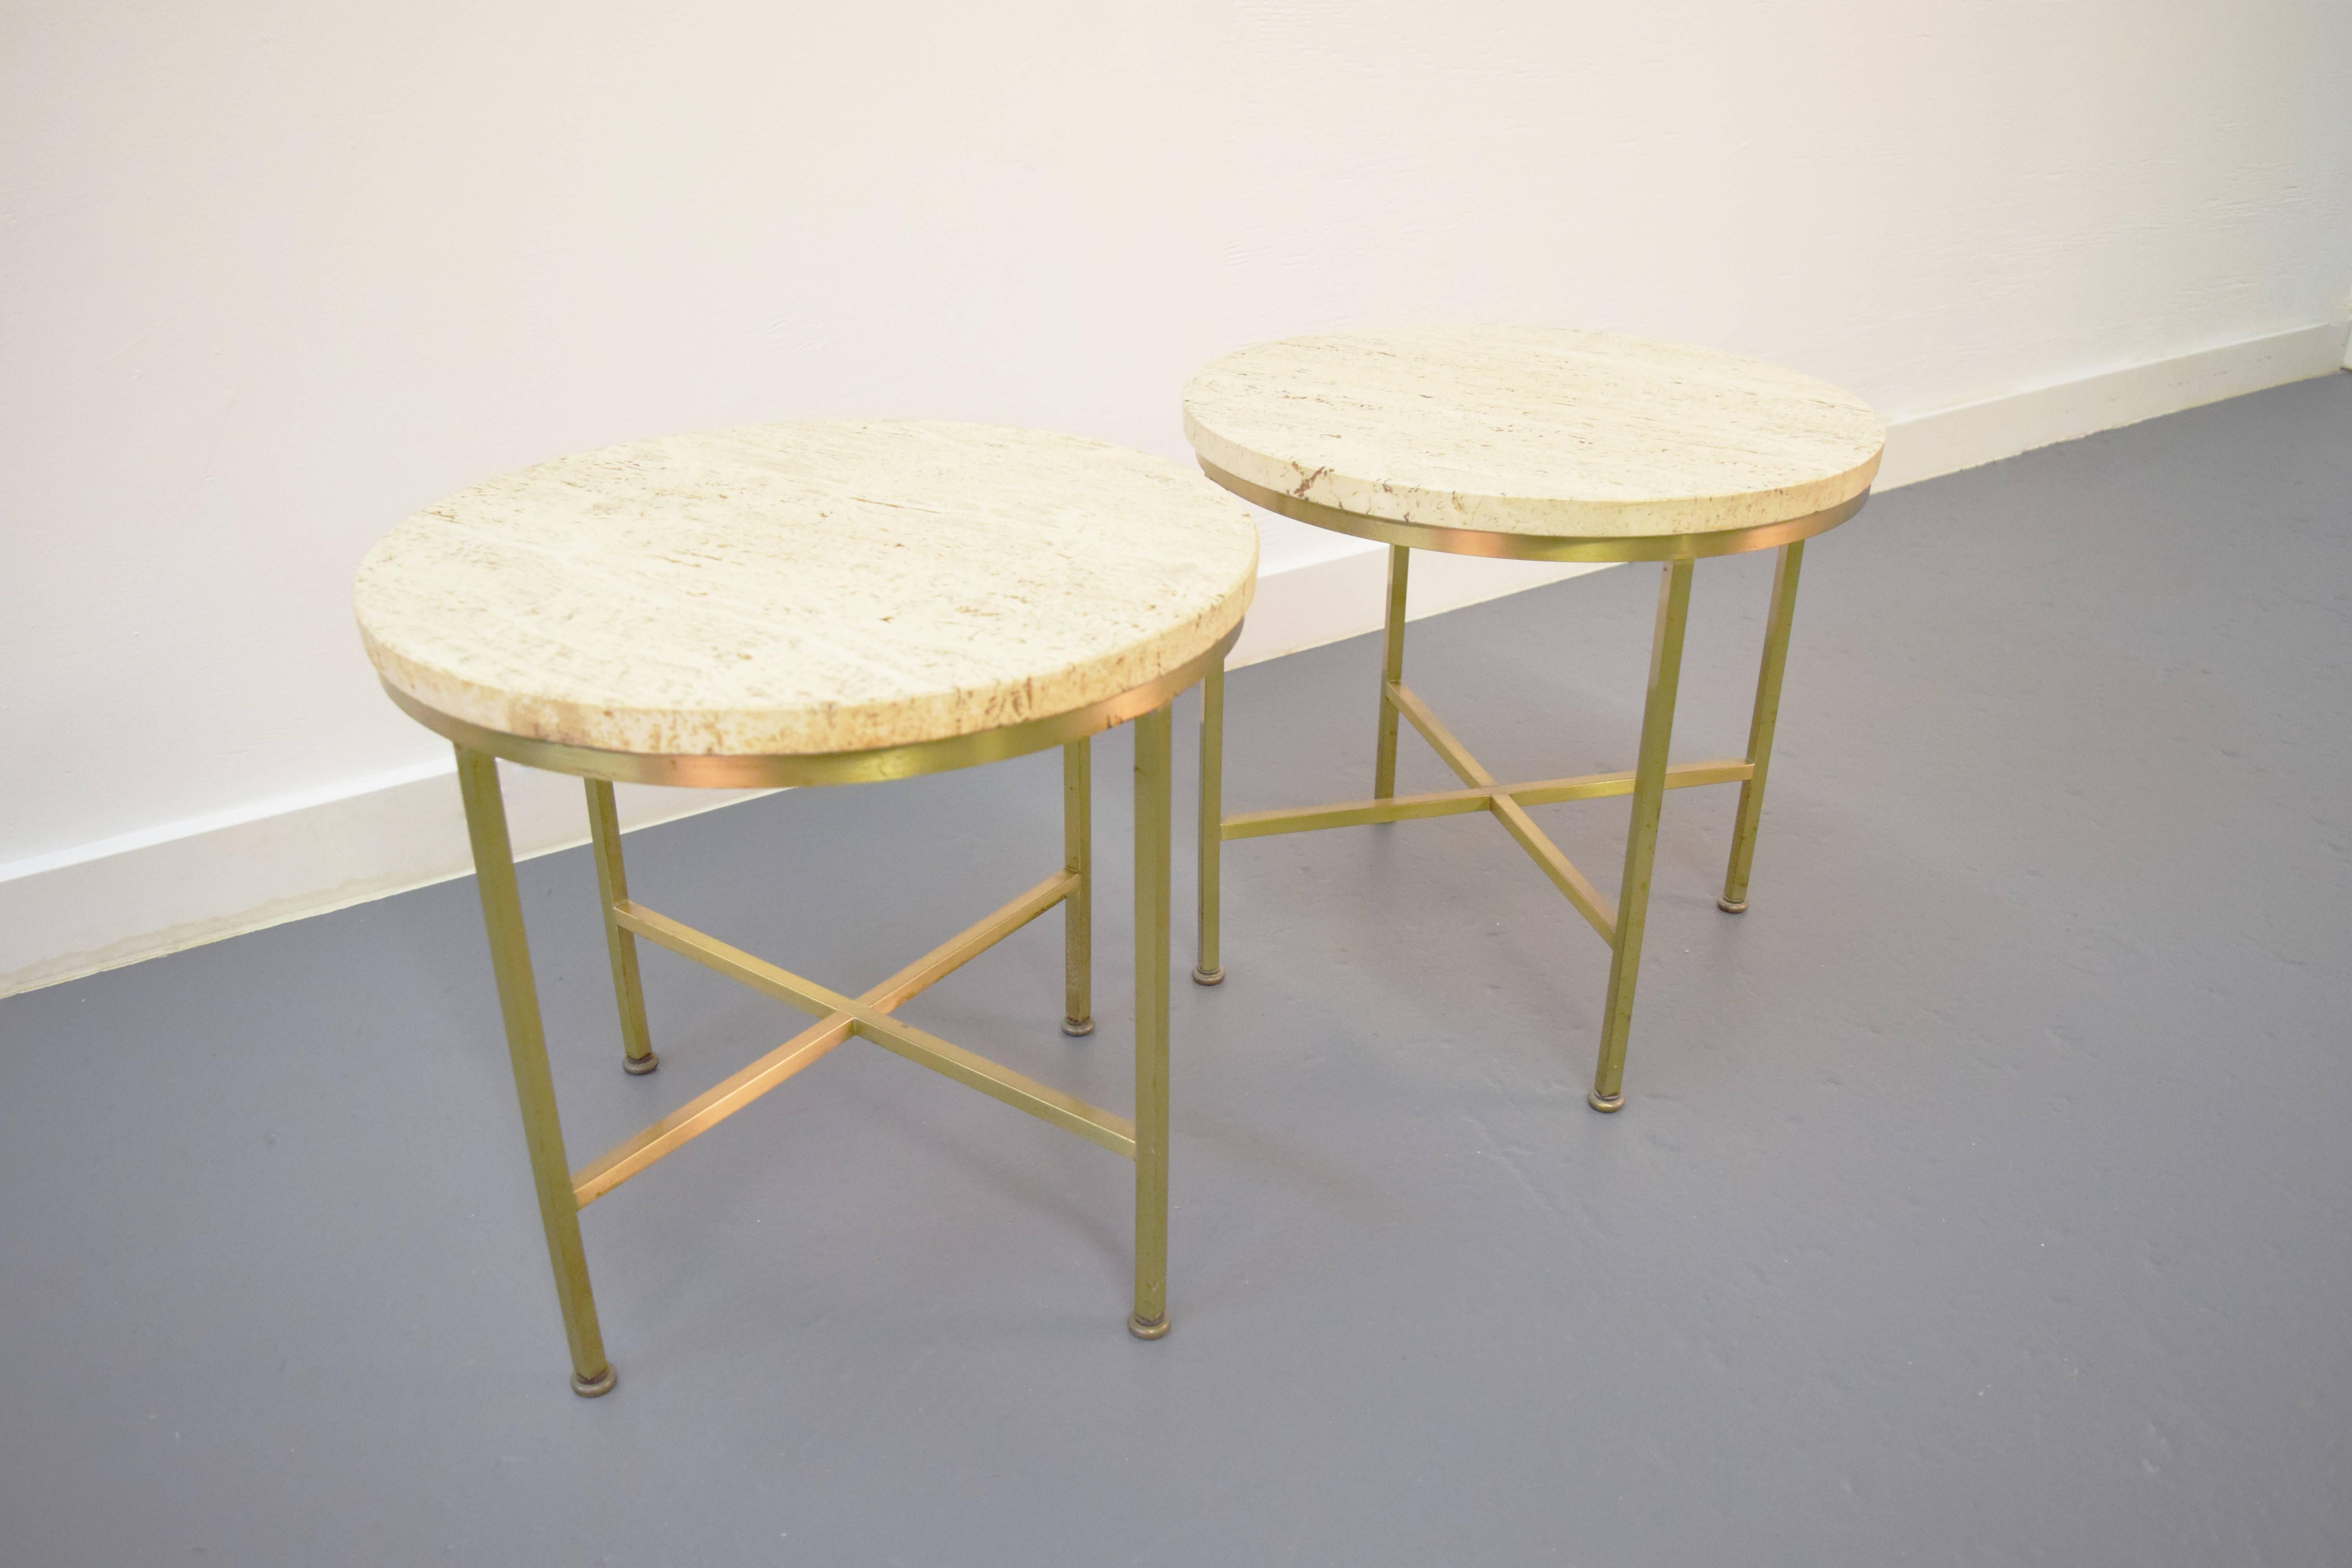 Travertine and brass occasional tables by Paul McCobb for Directional.